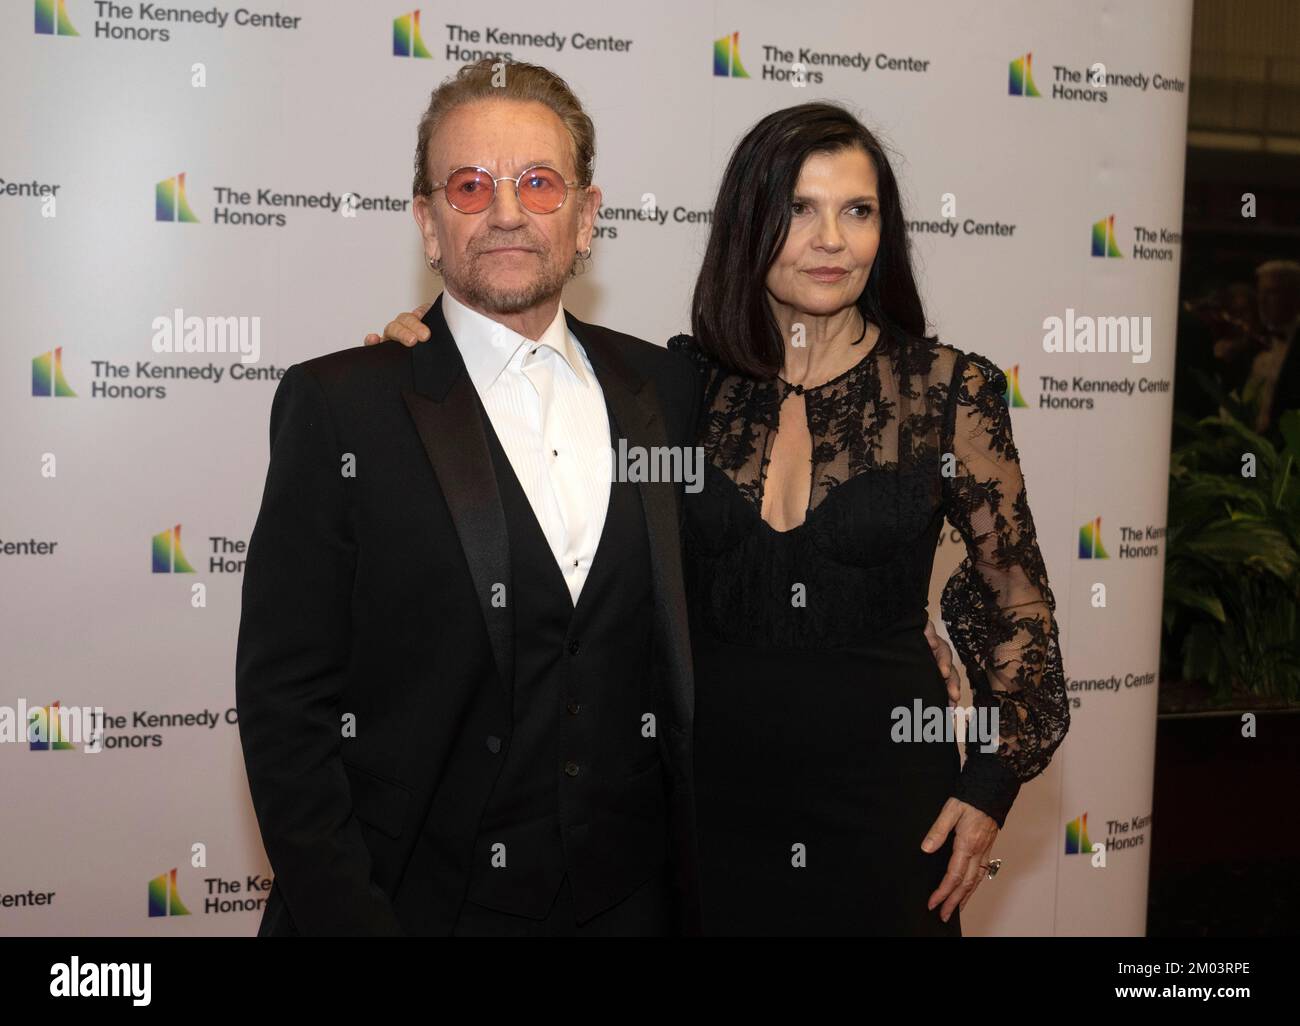 Bono and his wife, Ali Hewson, arrive for the formal Artist's Dinner honoring the recipients of the 45th Annual Kennedy Center Honors at the Department of State in Washington, DC on Saturday, December 3, 2022. The 2022 honorees are: actor and filmmaker George Clooney; contemporary Christian and pop singer-songwriter Amy Grant; legendary singer of soul, Gospel, R&B, and pop Gladys Knight; Cuban-born American composer, conductor, and educator Tania León; and iconic Irish rock band U2, comprised of band members Bono, The Edge, Adam Clayton, and Larry Mullen Jr. Credit: Ron Sachs/Pool via CNP Stock Photo